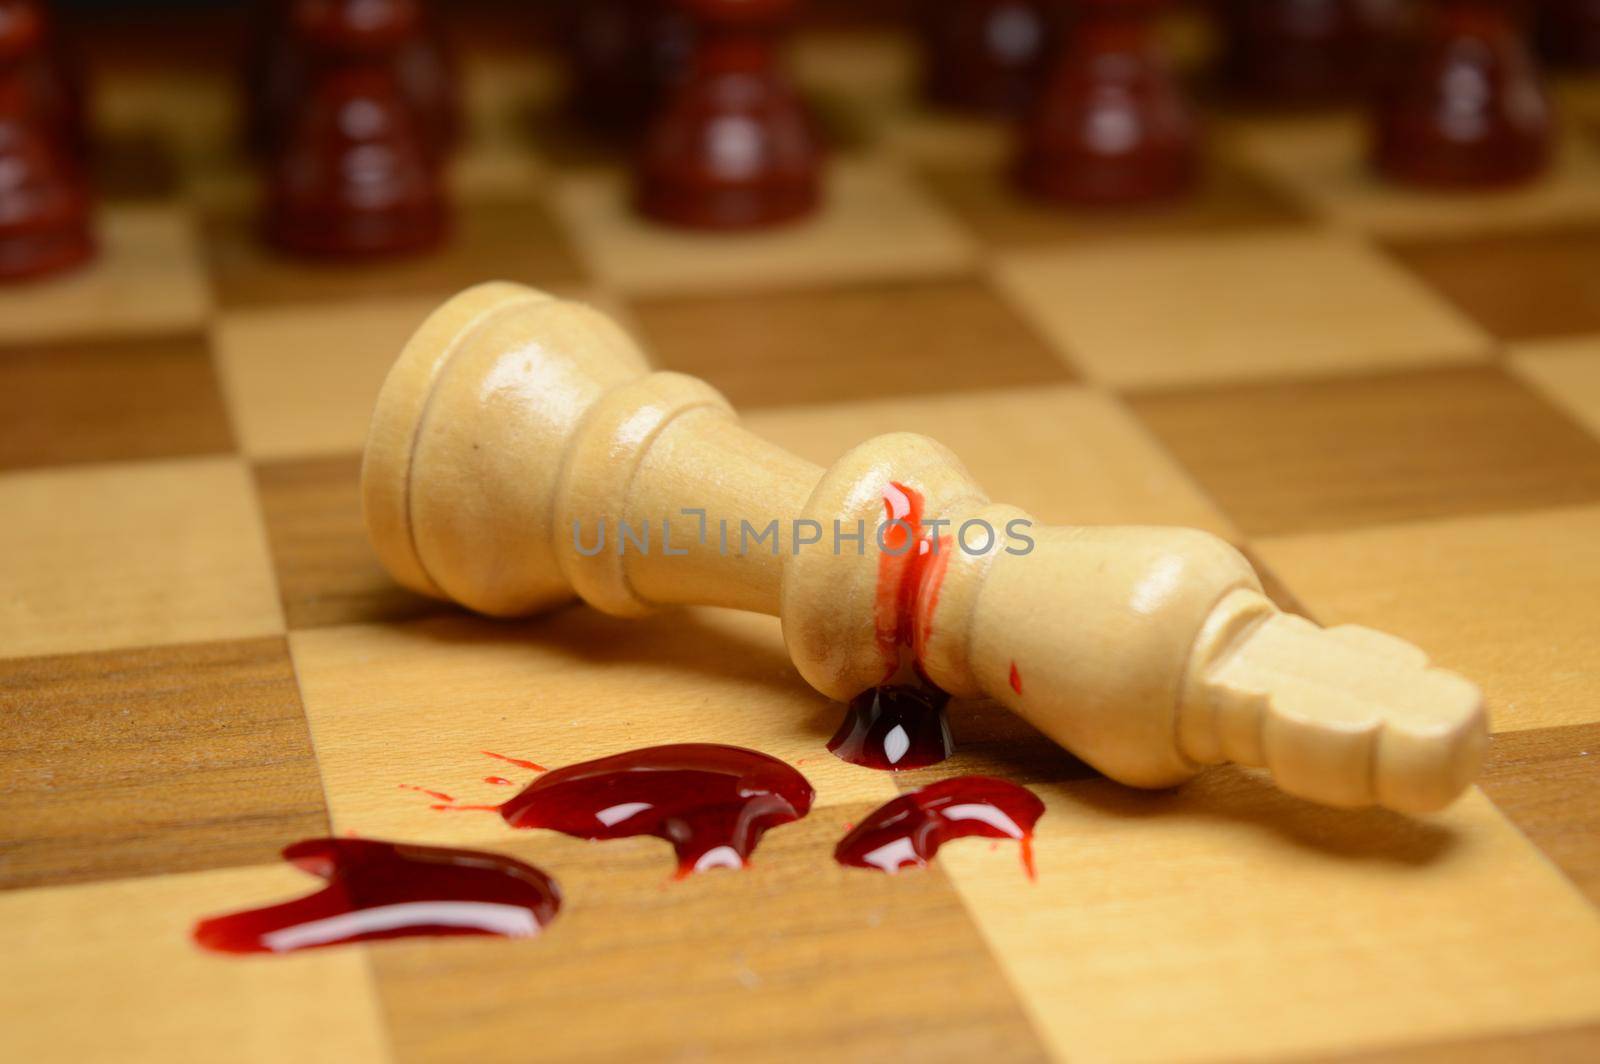 A concept based on the final move in chess called checkmate and the killing of the king.